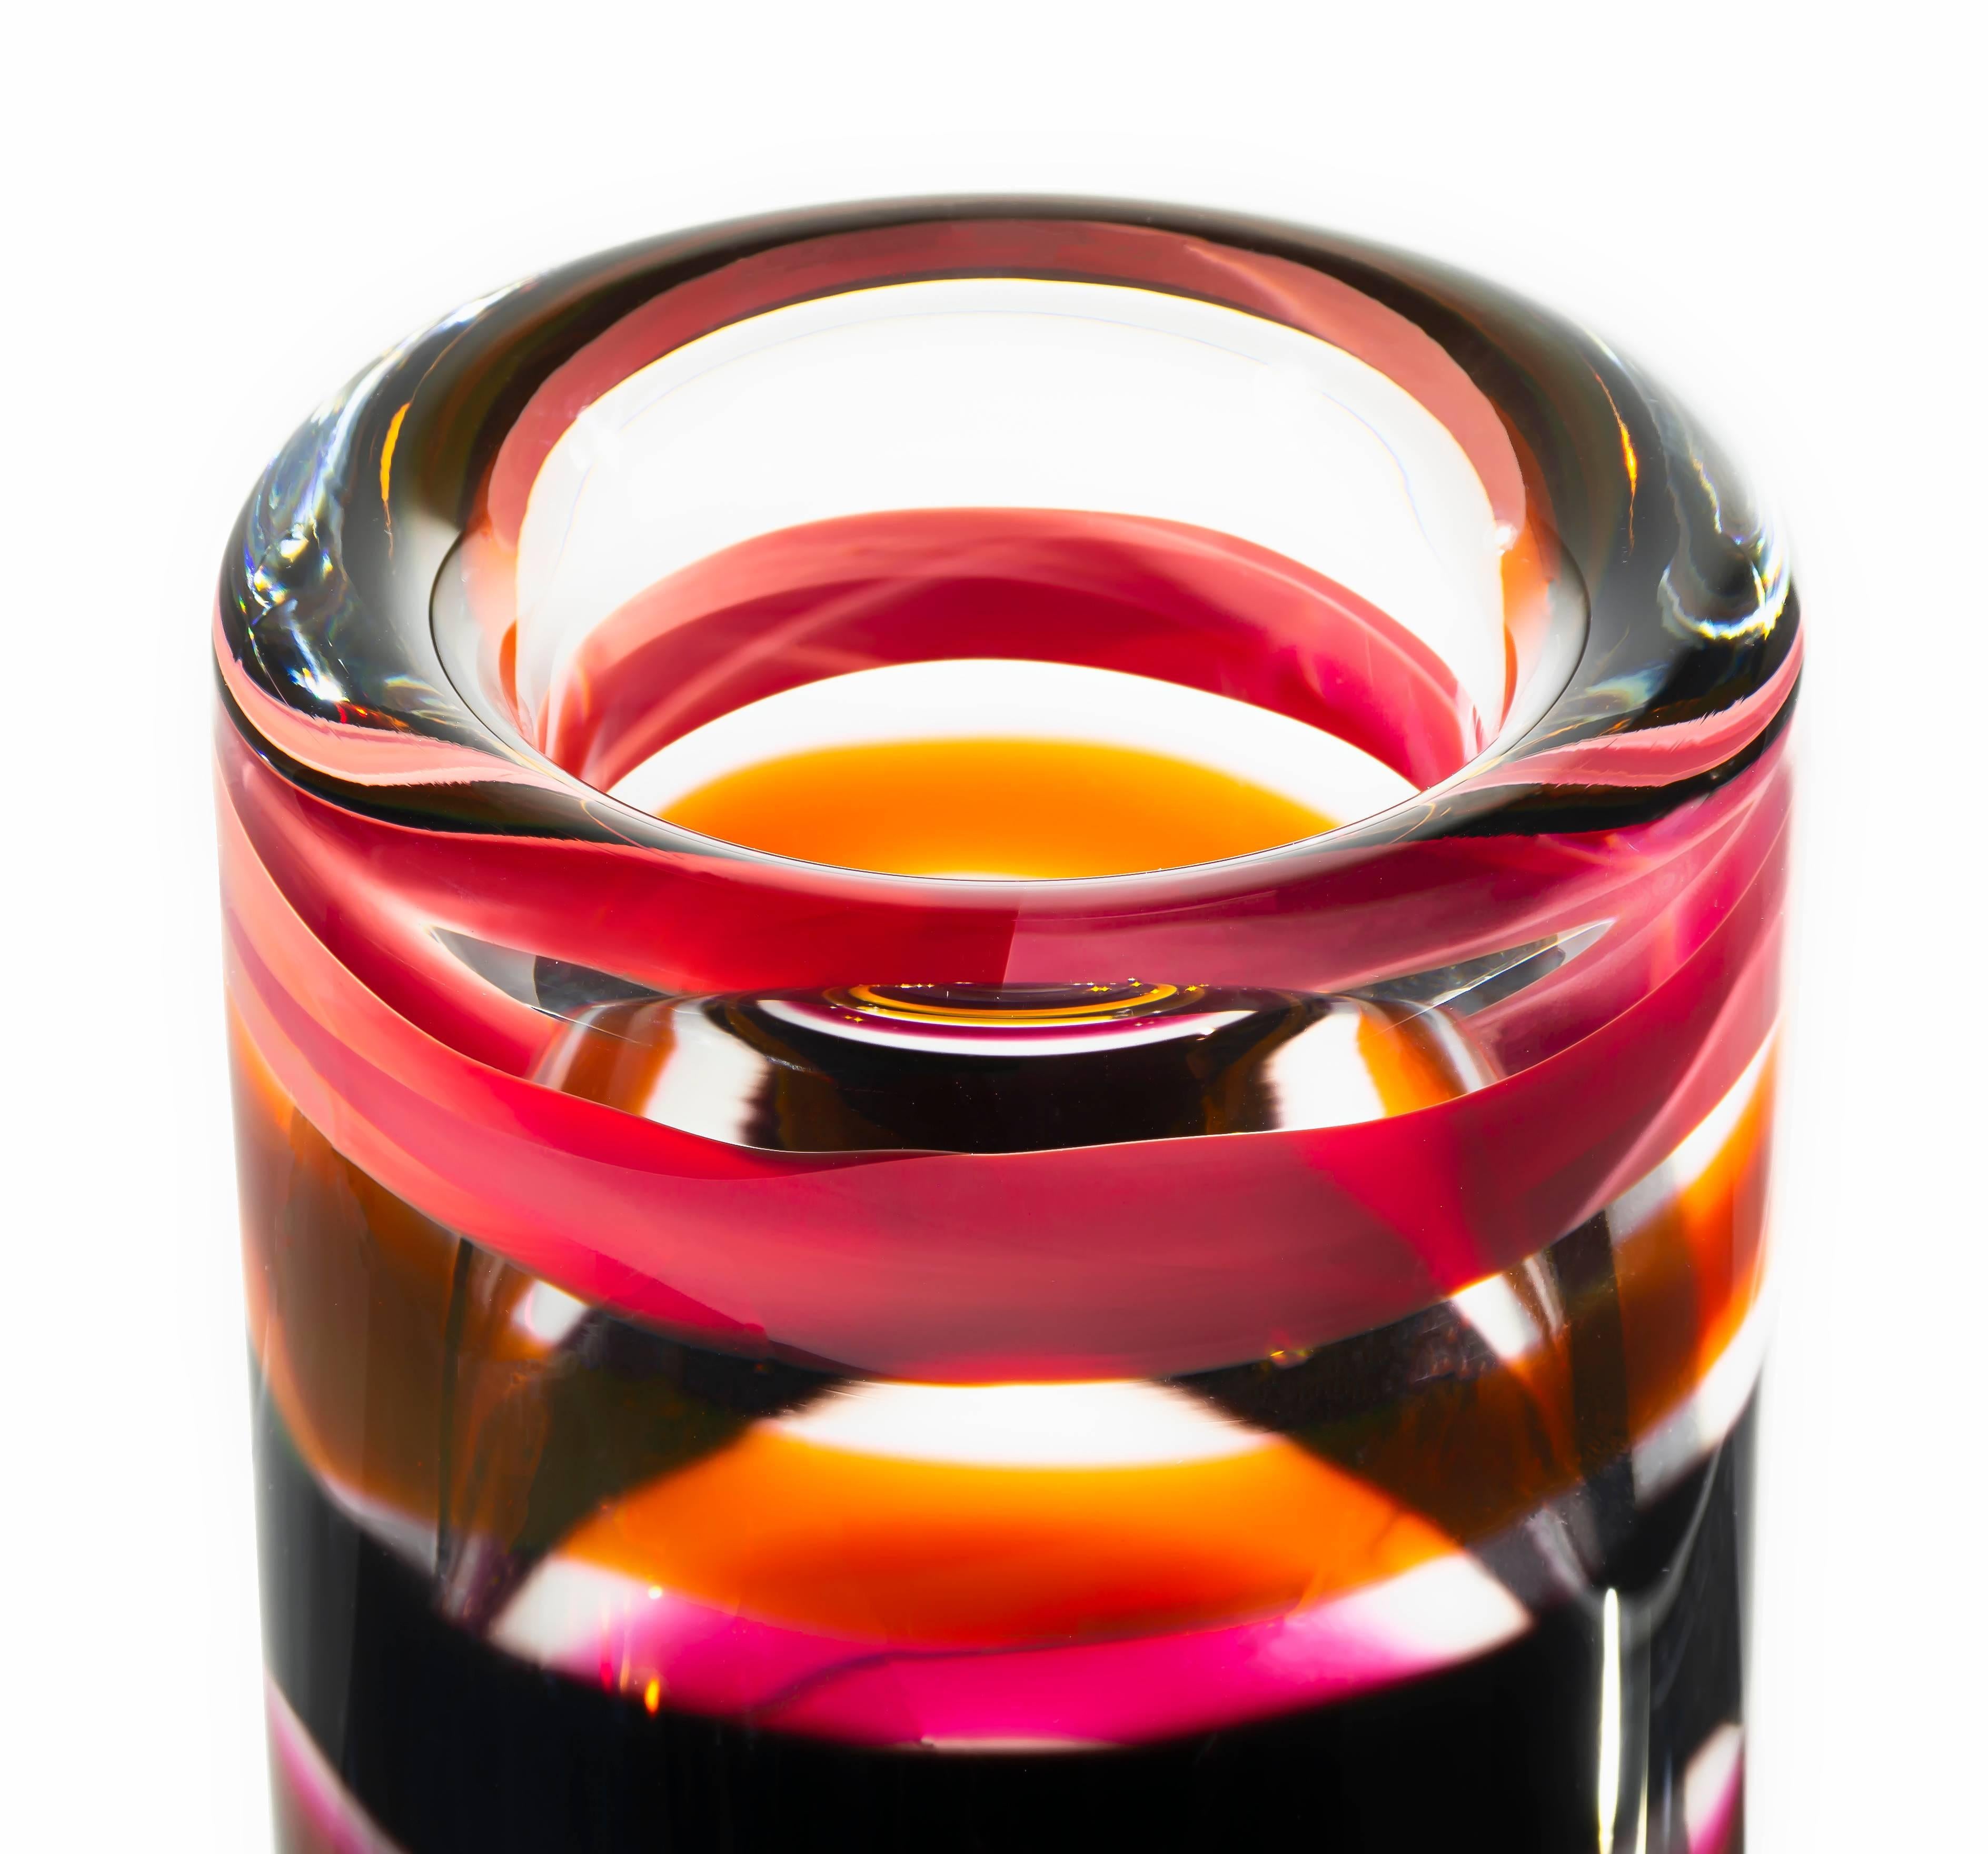 Striped cylinder vase - red amber
Red and amber striped Murano inspired cylinder vase. Glass handblown and shaped in lead free crystal.
Designed by Caleb Siemon, Made in California by Siemon and Salazar.
Handmade.
Striped series.
Lead-free